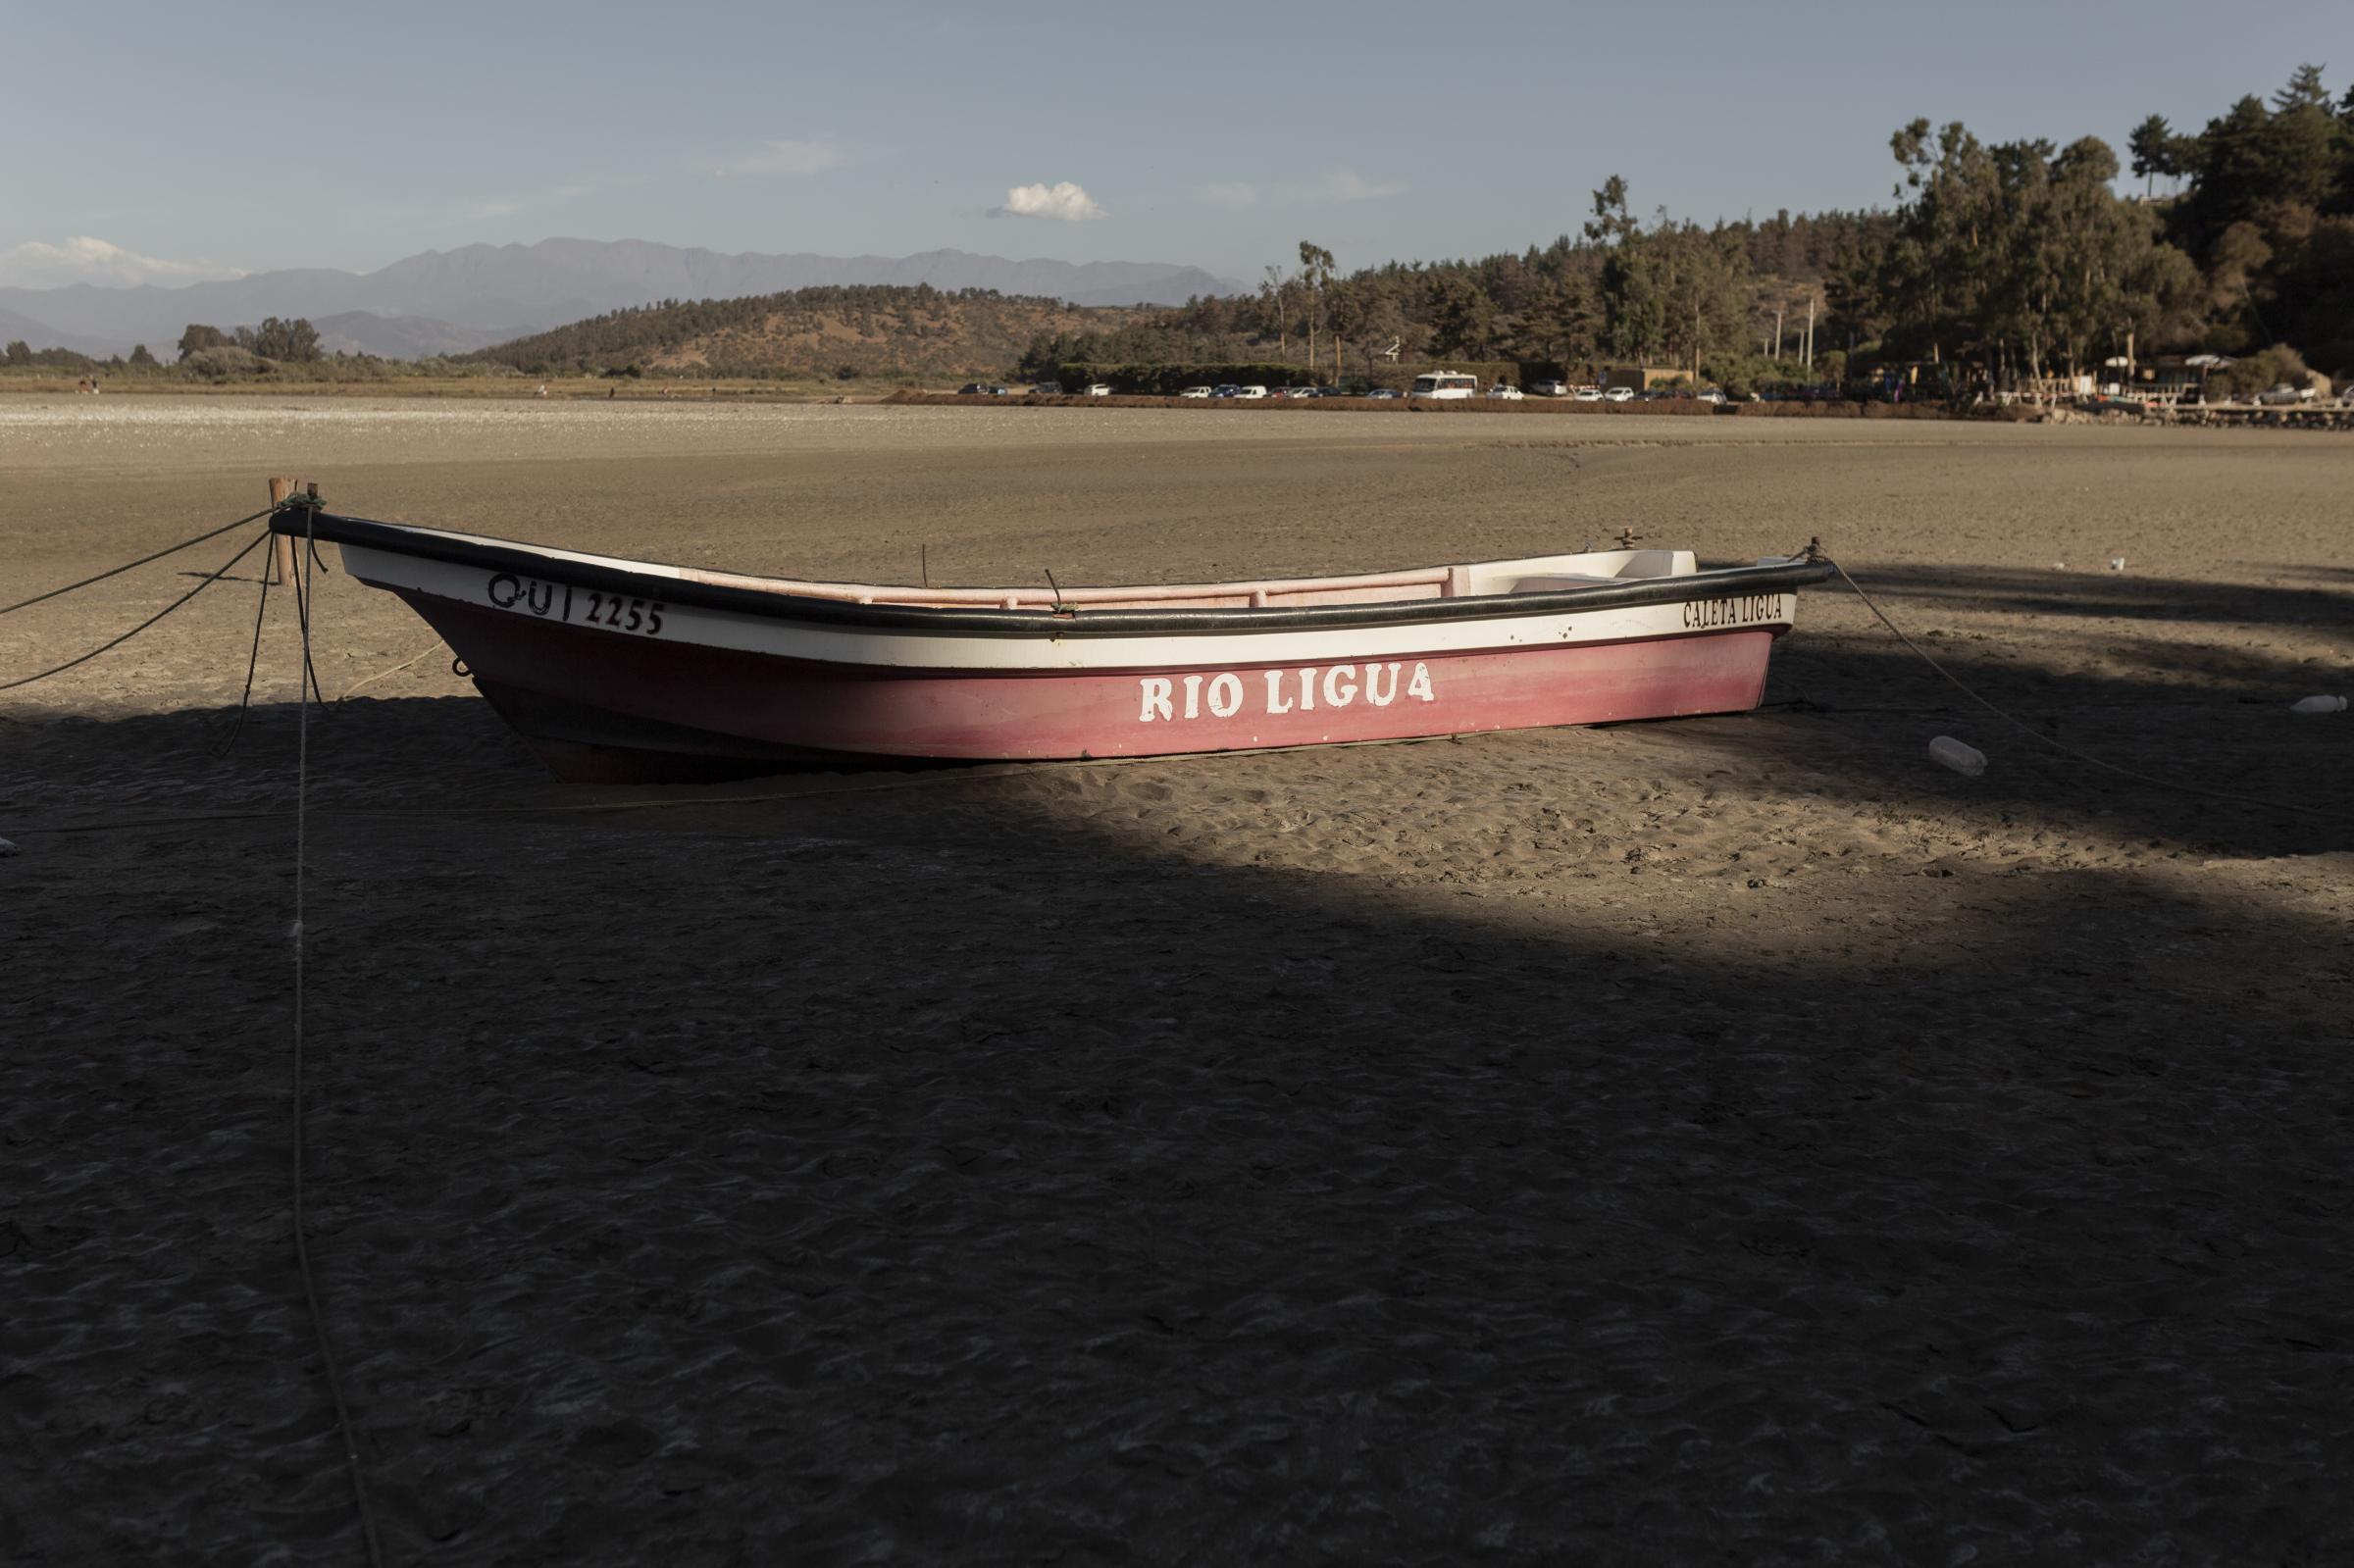 Where the devil died of thirst (Ongoing) - A boat named “Río Ligua” is seen on...